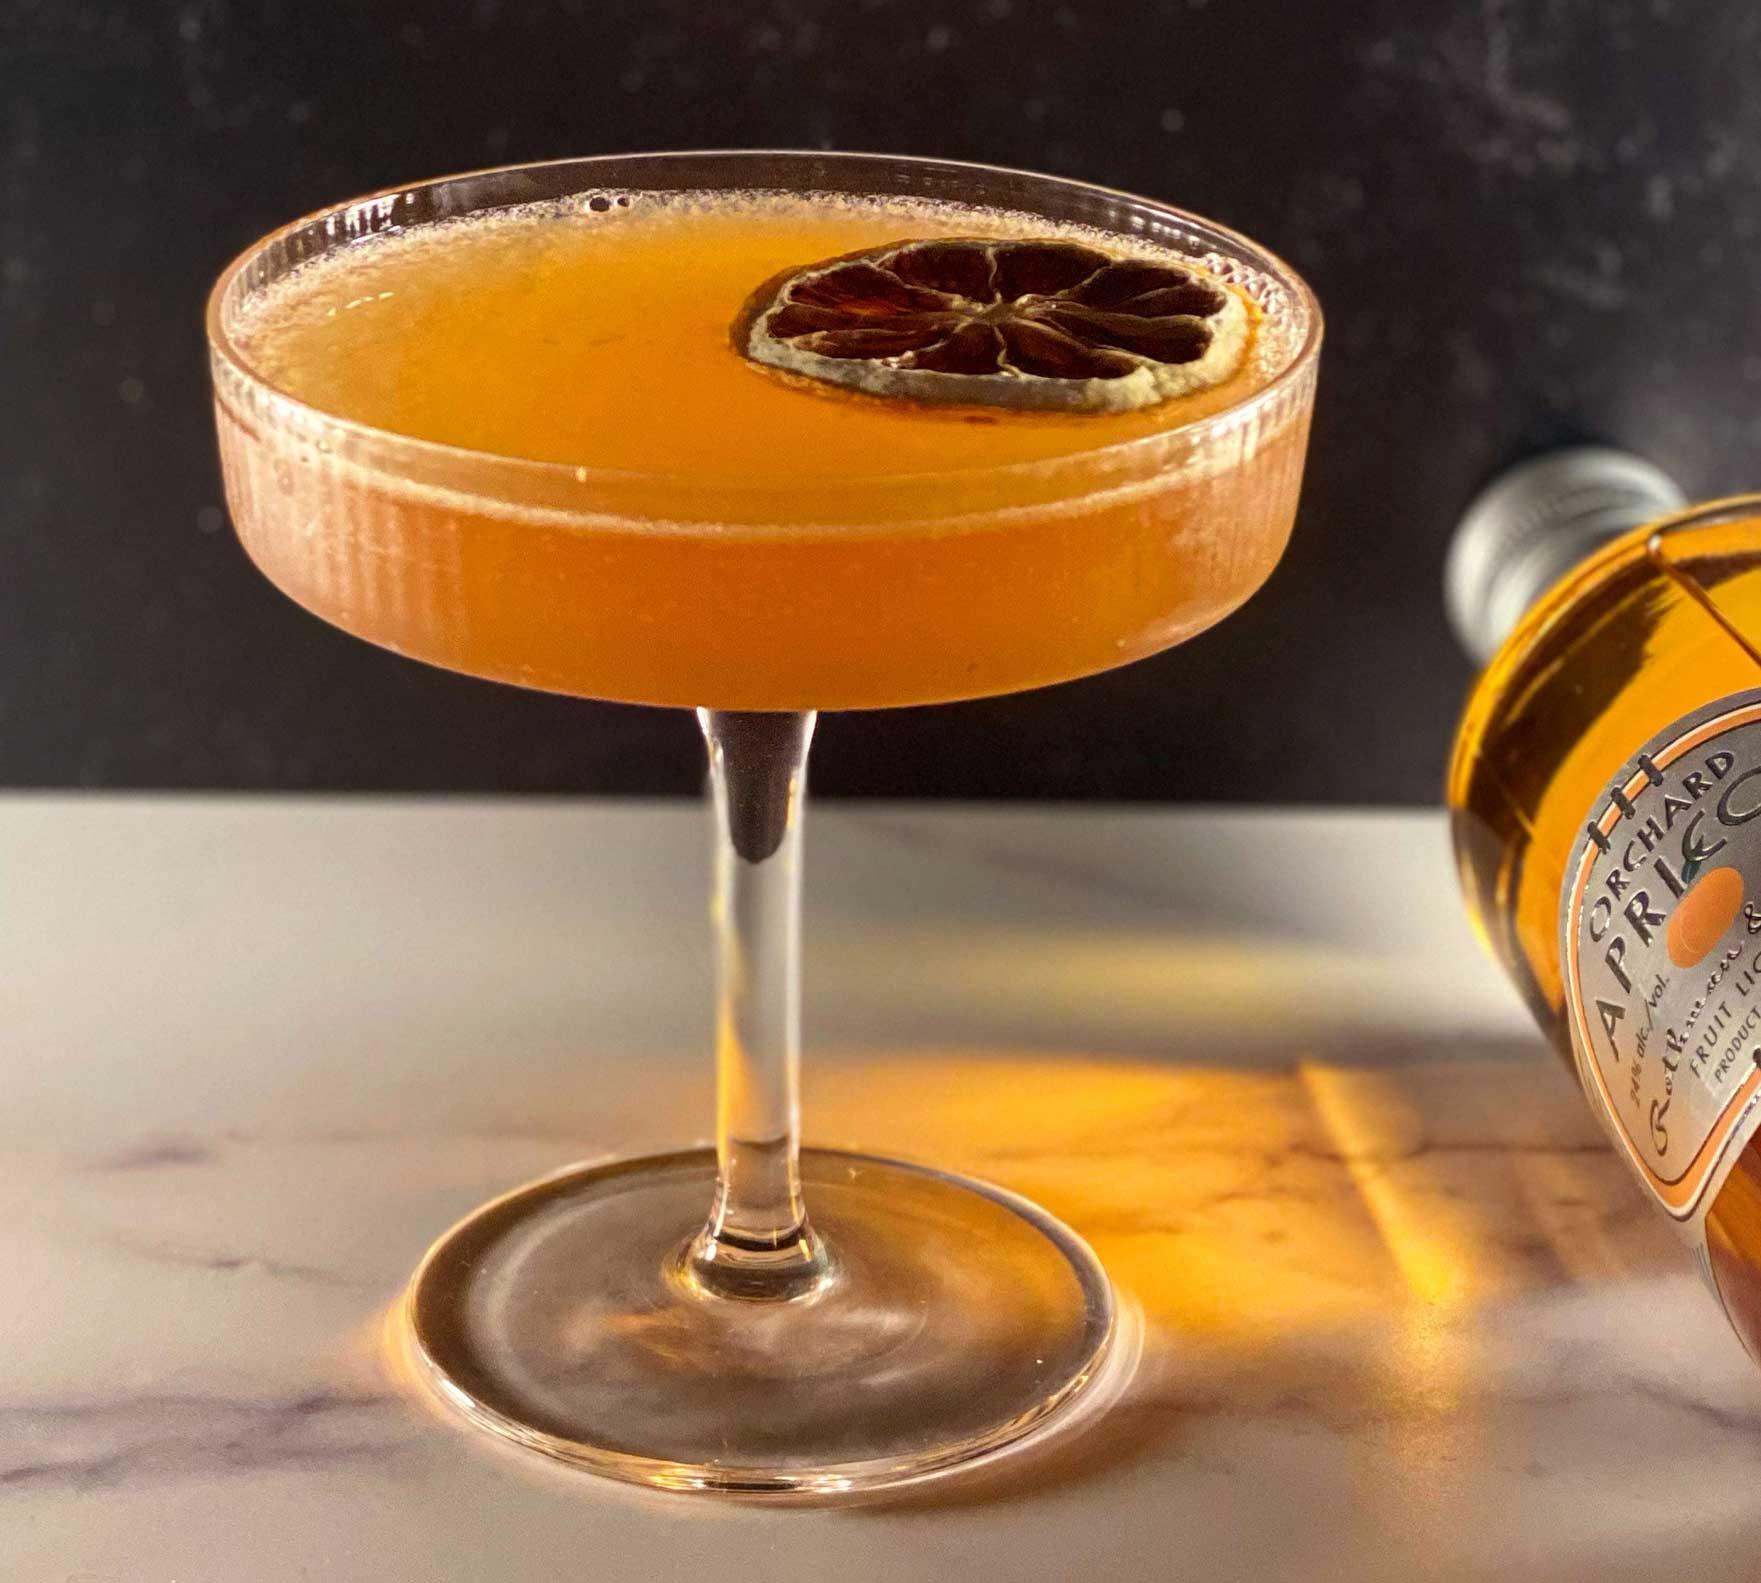 An example of the Flor de Jerez, the mixed drink (drink), by Joaquìn Simò, NYC, featuring amontillado, lemon juice, Smith & Cross Traditional Jamaica Rum, rich simple syrup, Rothman & Winter Orchard Apricot Liqueur, and Angostura bitters; photo by @slightlygarnished